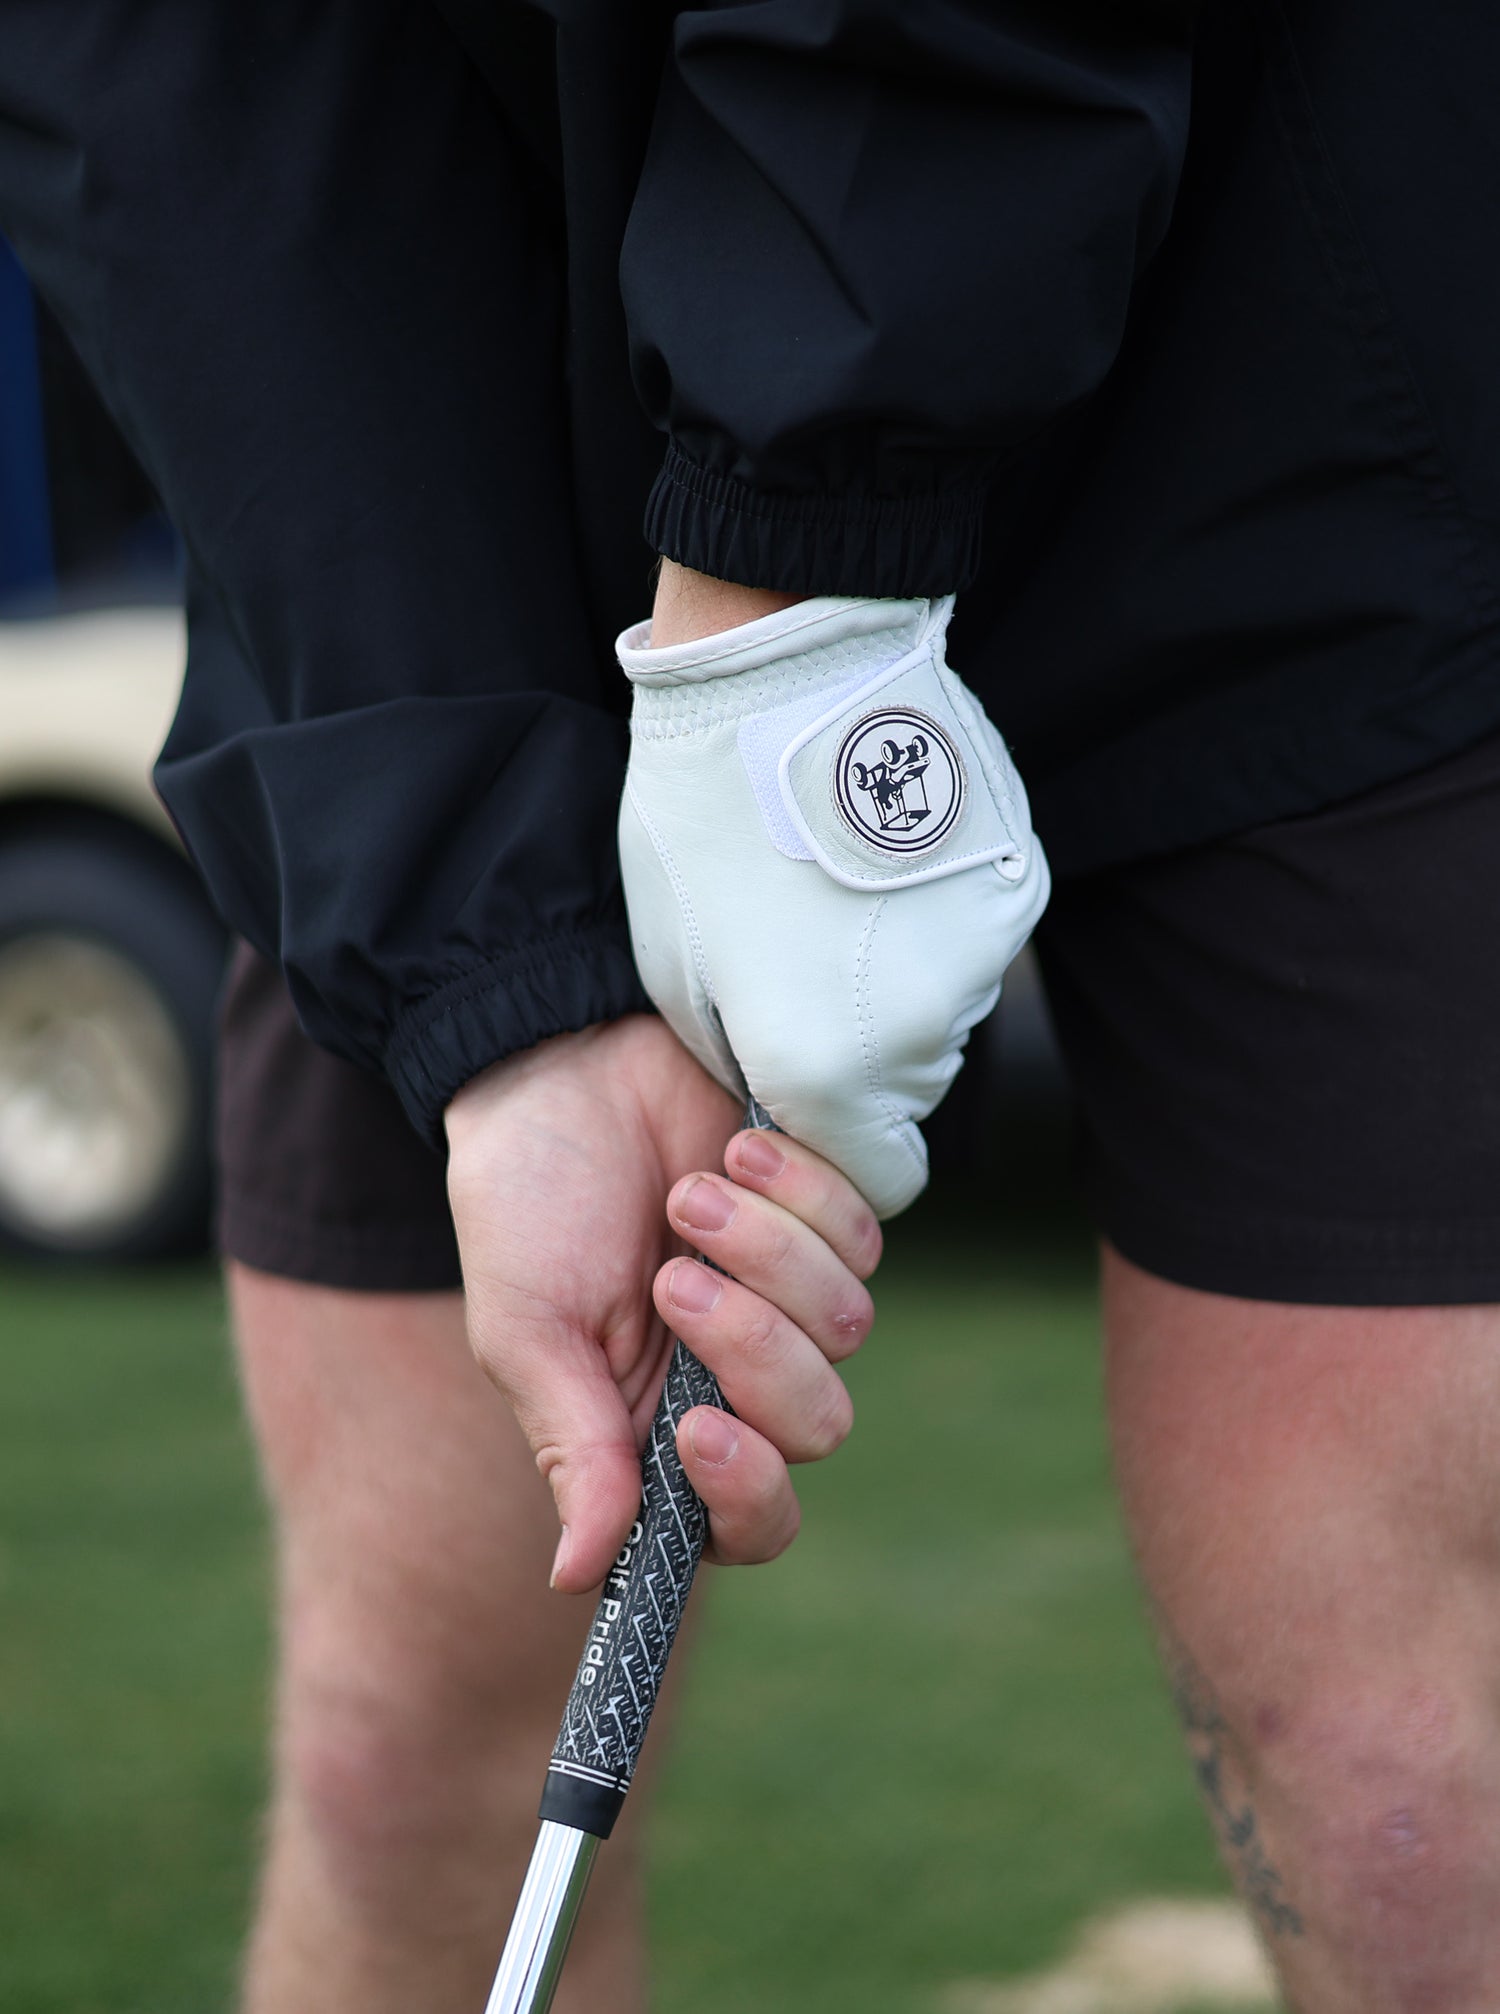 a person holding a golf club with a glove on it.